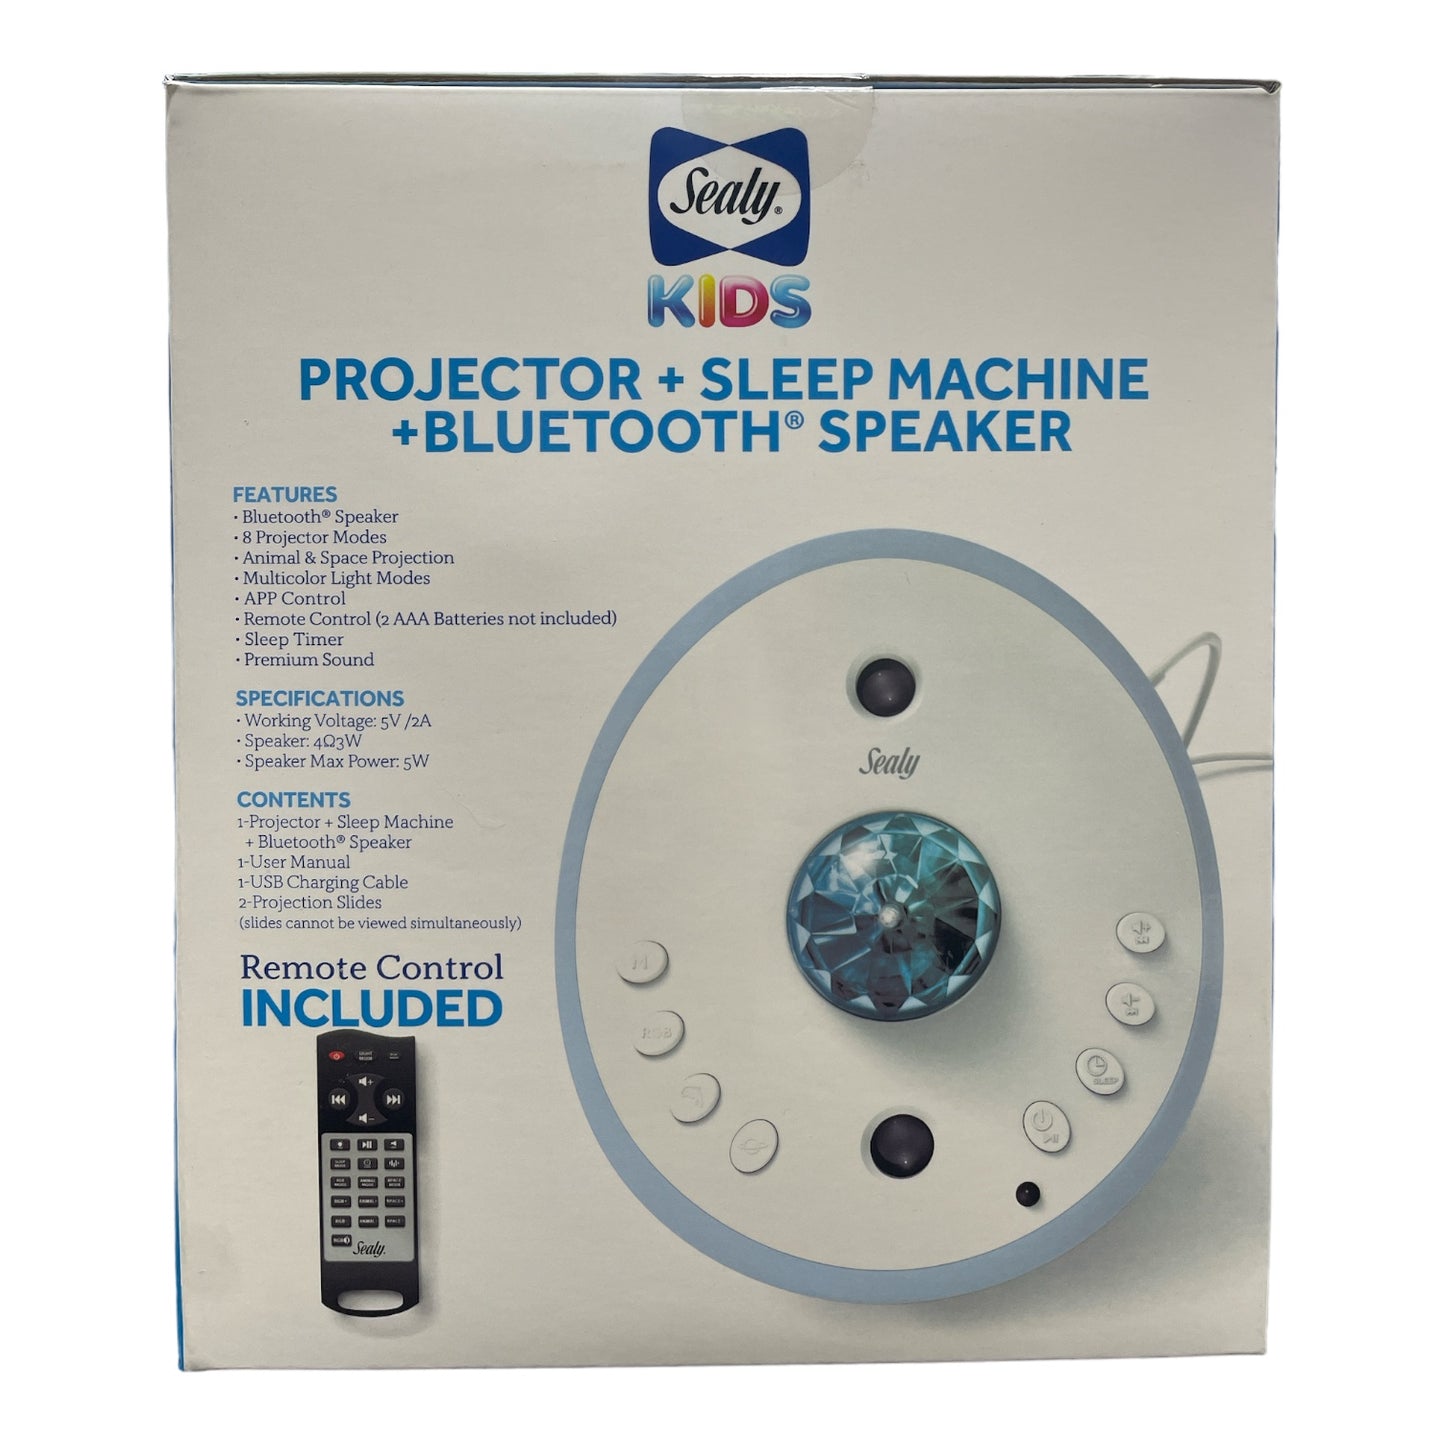 Sealy Kids Projector + Sleep Machine with Bluetooth Speaker, 25 Sounds & Remote